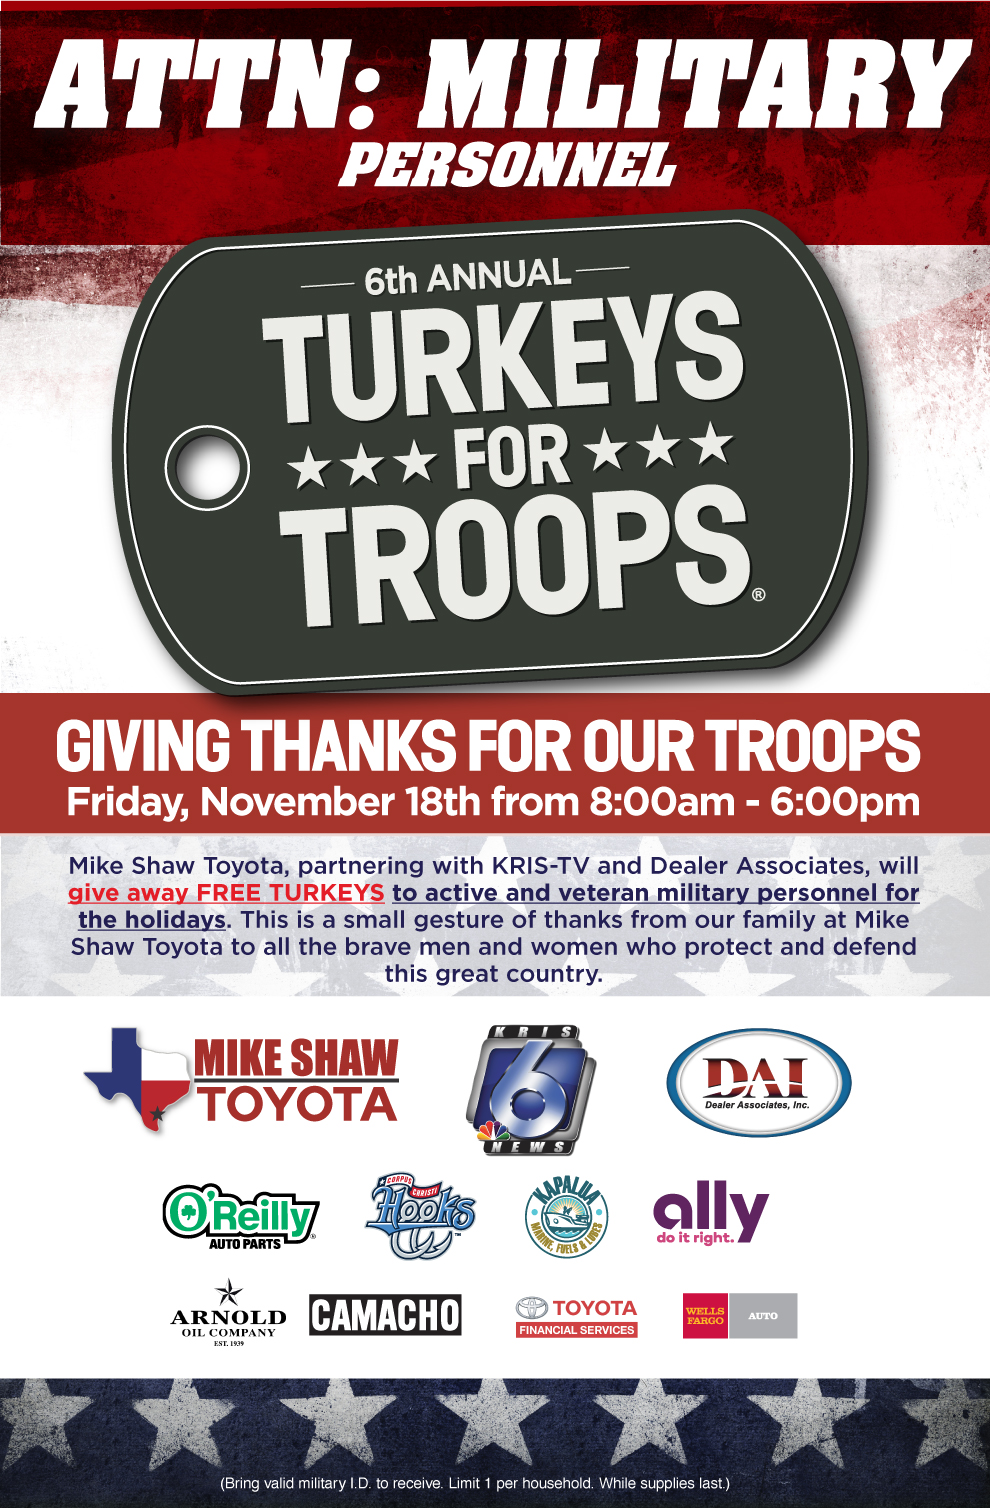 Turkeys For Troops - NOVEMBER 18TH, 2022. 8:00AM - 6:00PM | Our Annual Thanksgiving Give-away honoring the members of our Armed Services Location: Mike Shaw Toyota | 3232 IH-69 ACCESS ROAD | CORPUS CHRISTI, TX